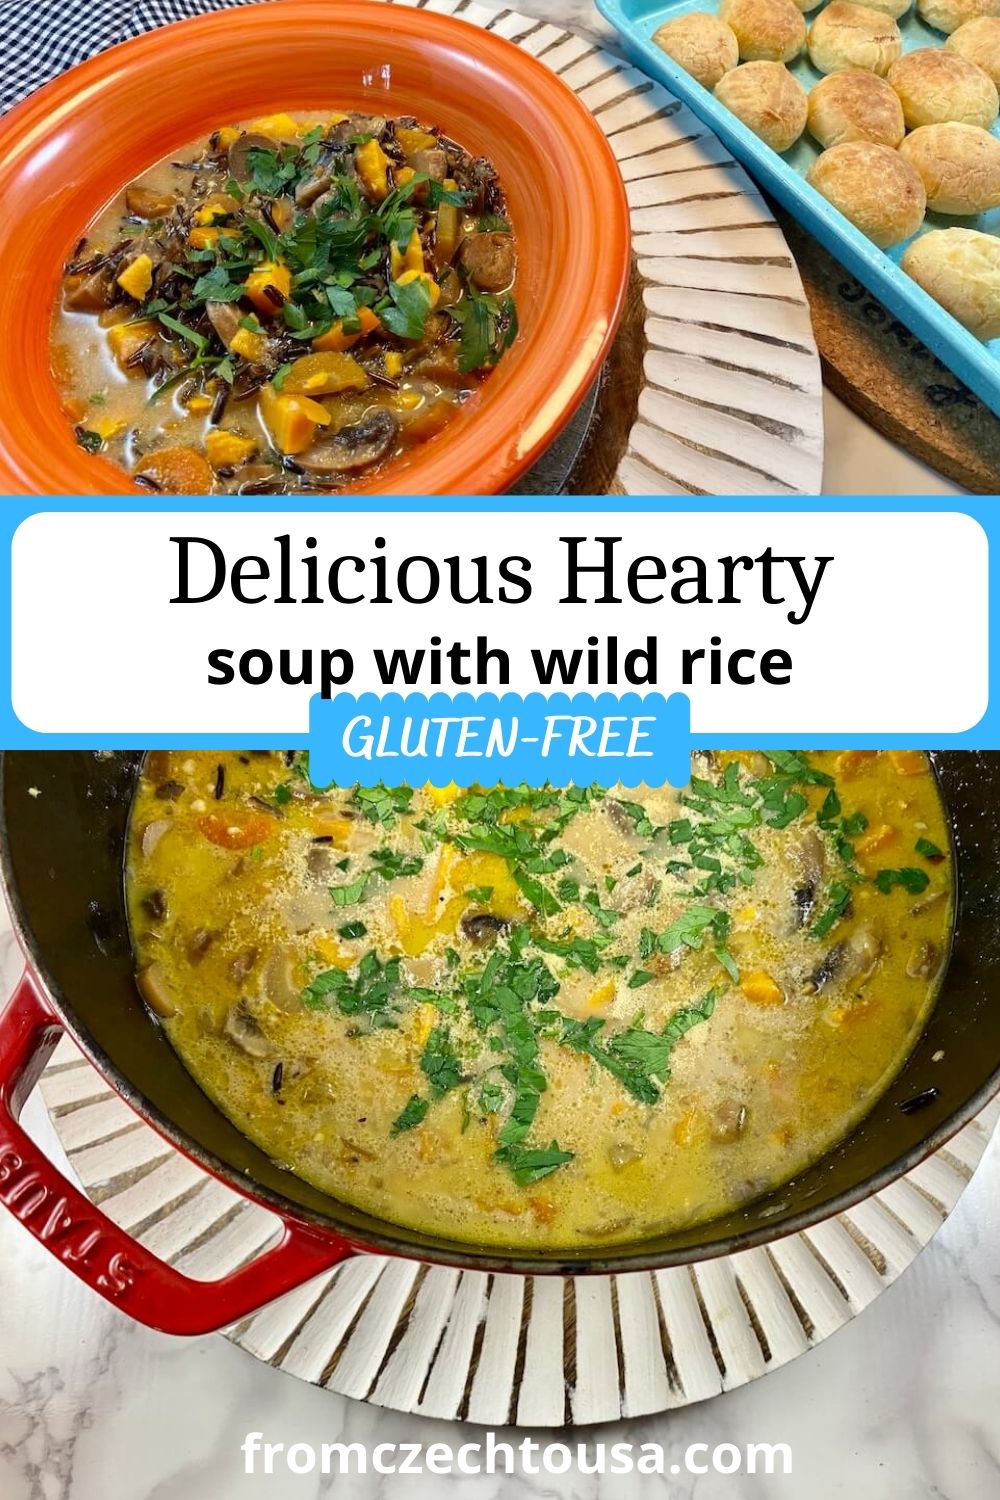 A Gluten-Free hearty soup with wild rice